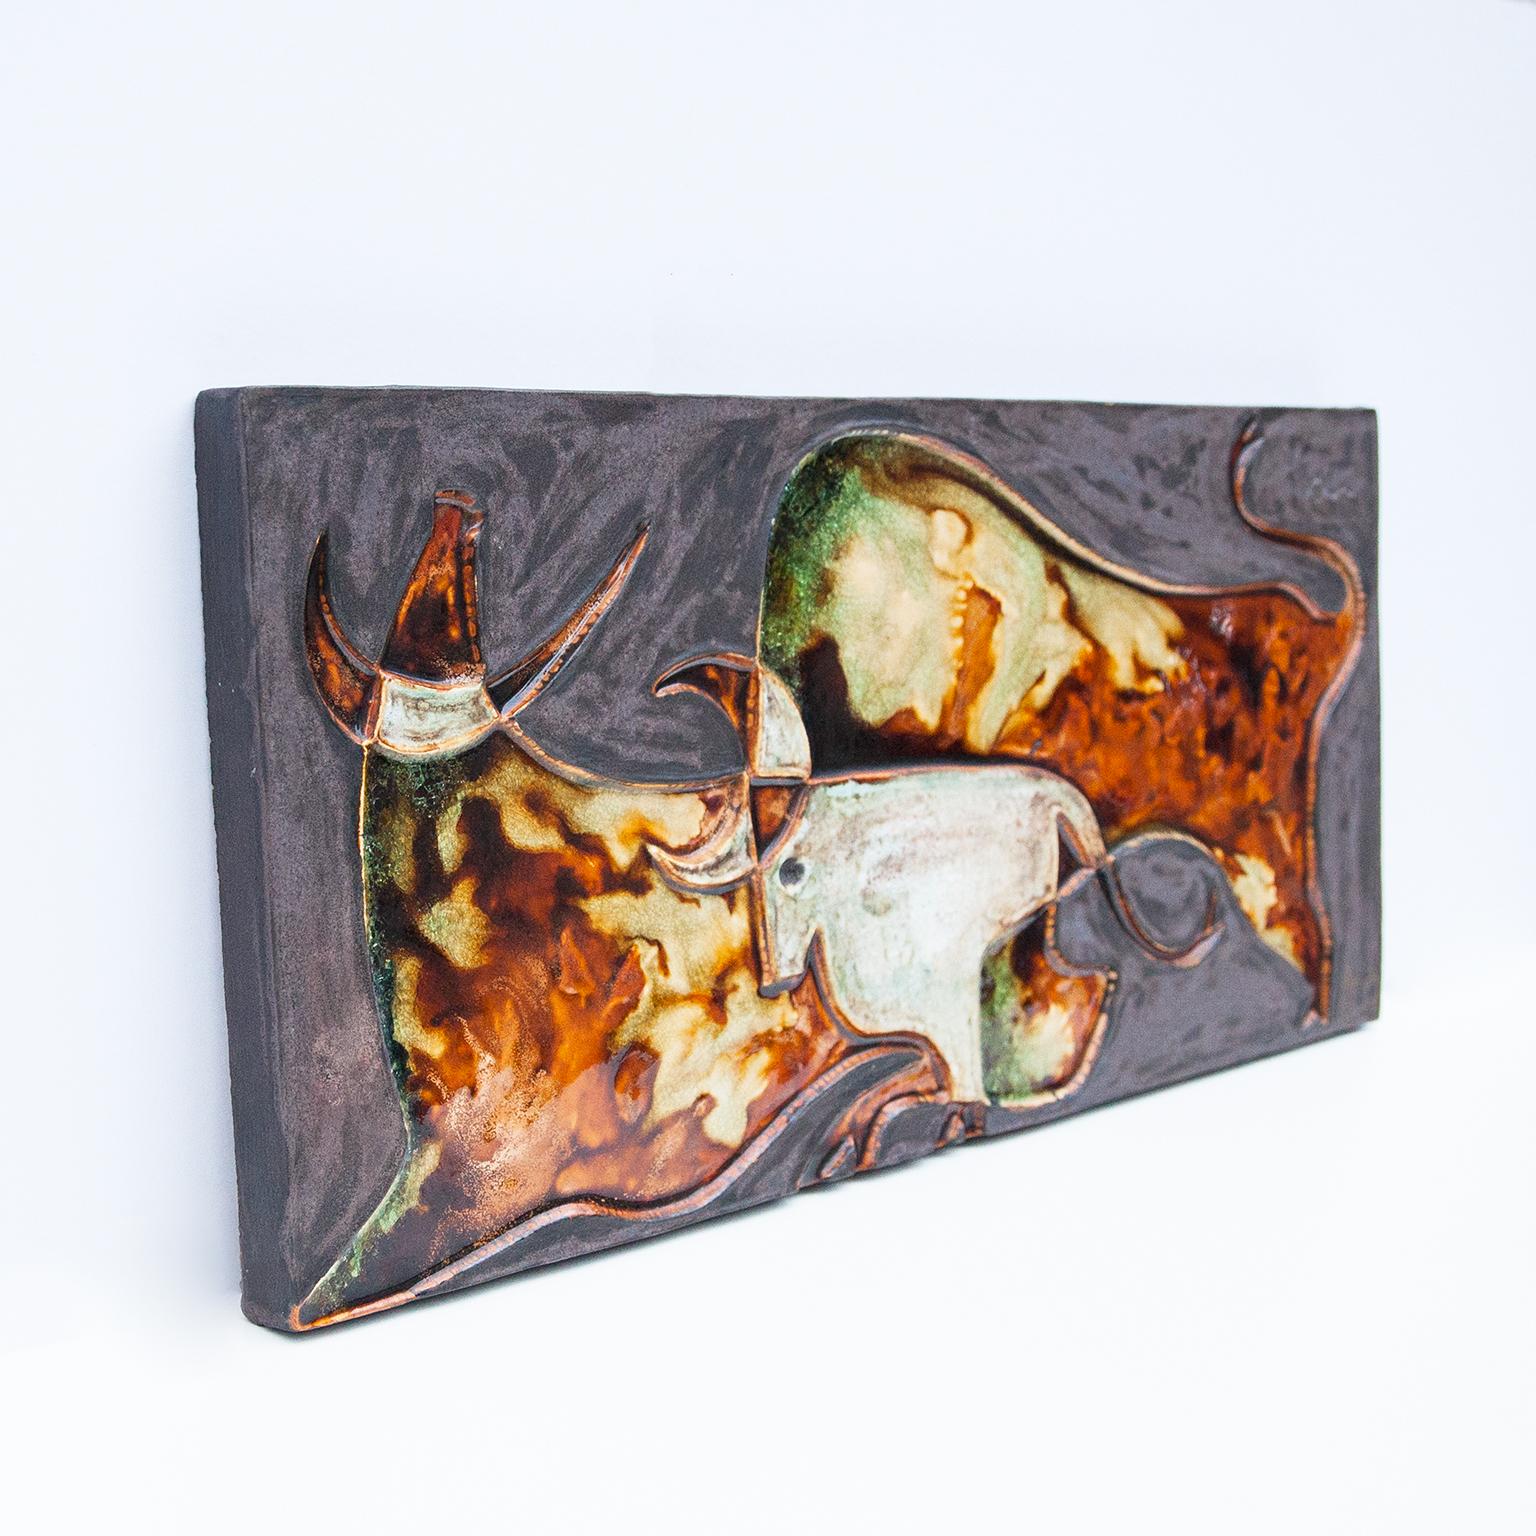 The unique wall panel is made with three bulls in grey, green brown ceramic in Jean Miro Style, designed by Helmut Schäffenacker German art pottery / studio in 1960s. Wonderful object in deep colors and a unique piece with artist mark. Helmut